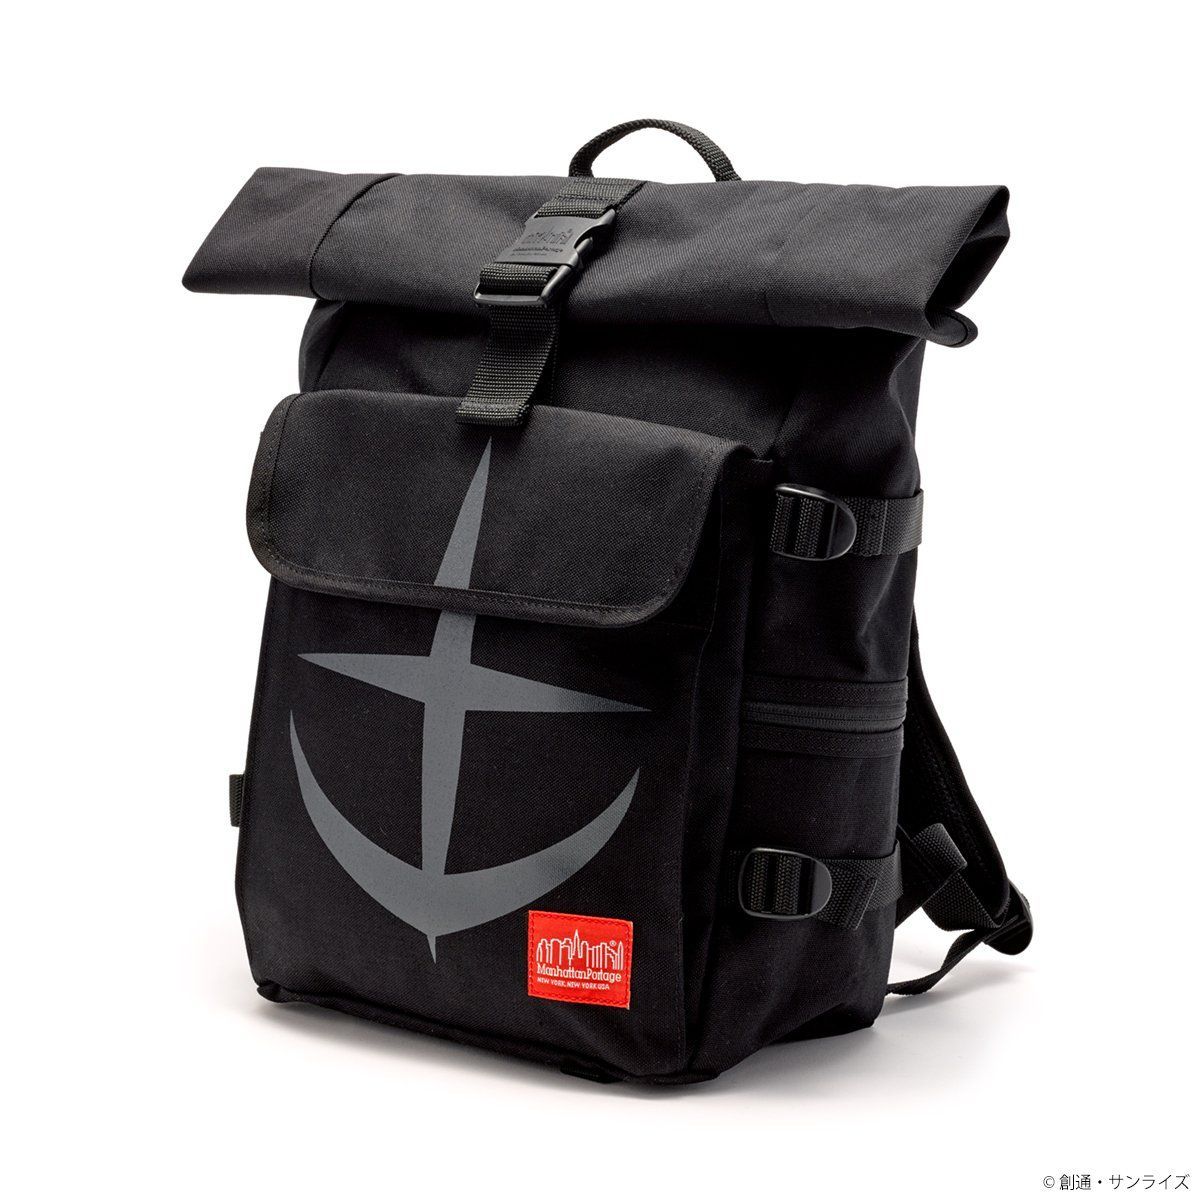 STRICT-G x Manhattan Portage "Mobile Suit Gundam" 40th Anniversary Backpack Earth Federation Forces Model - Black [End of November]